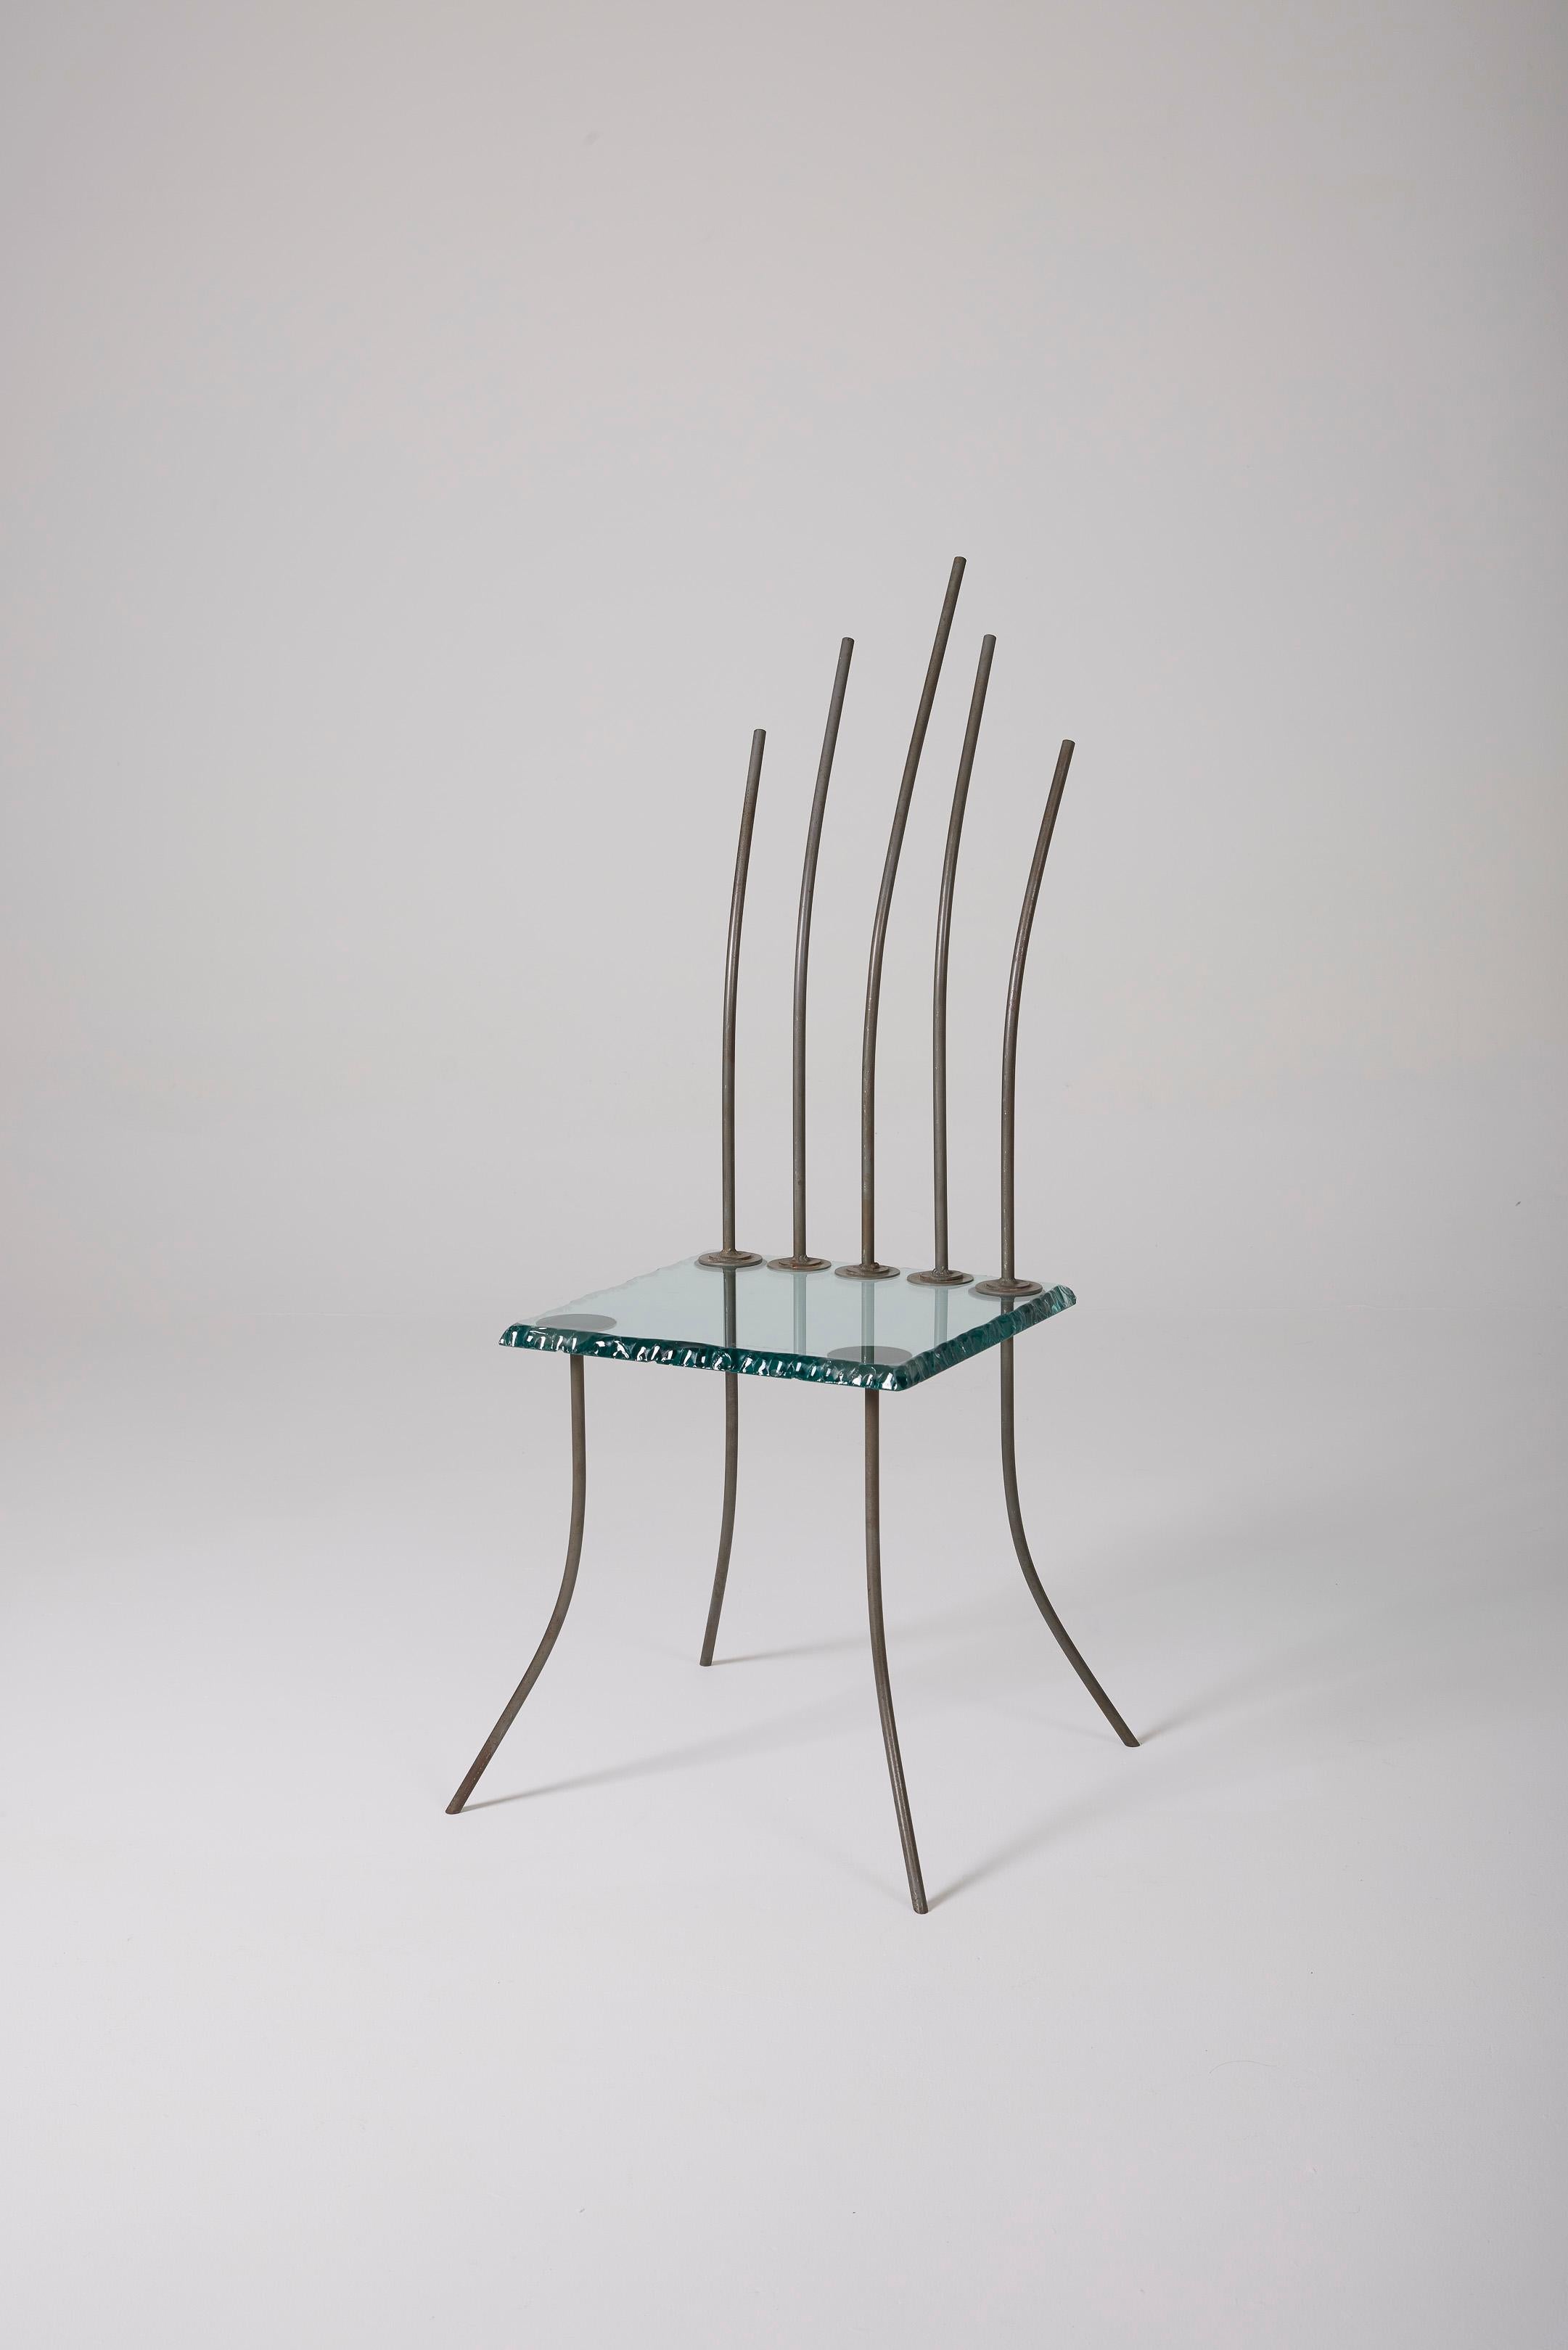 Rare chair with a wrought iron structure and a seat made of cut glass. Very good condition. Signed and numbered.
LP3183